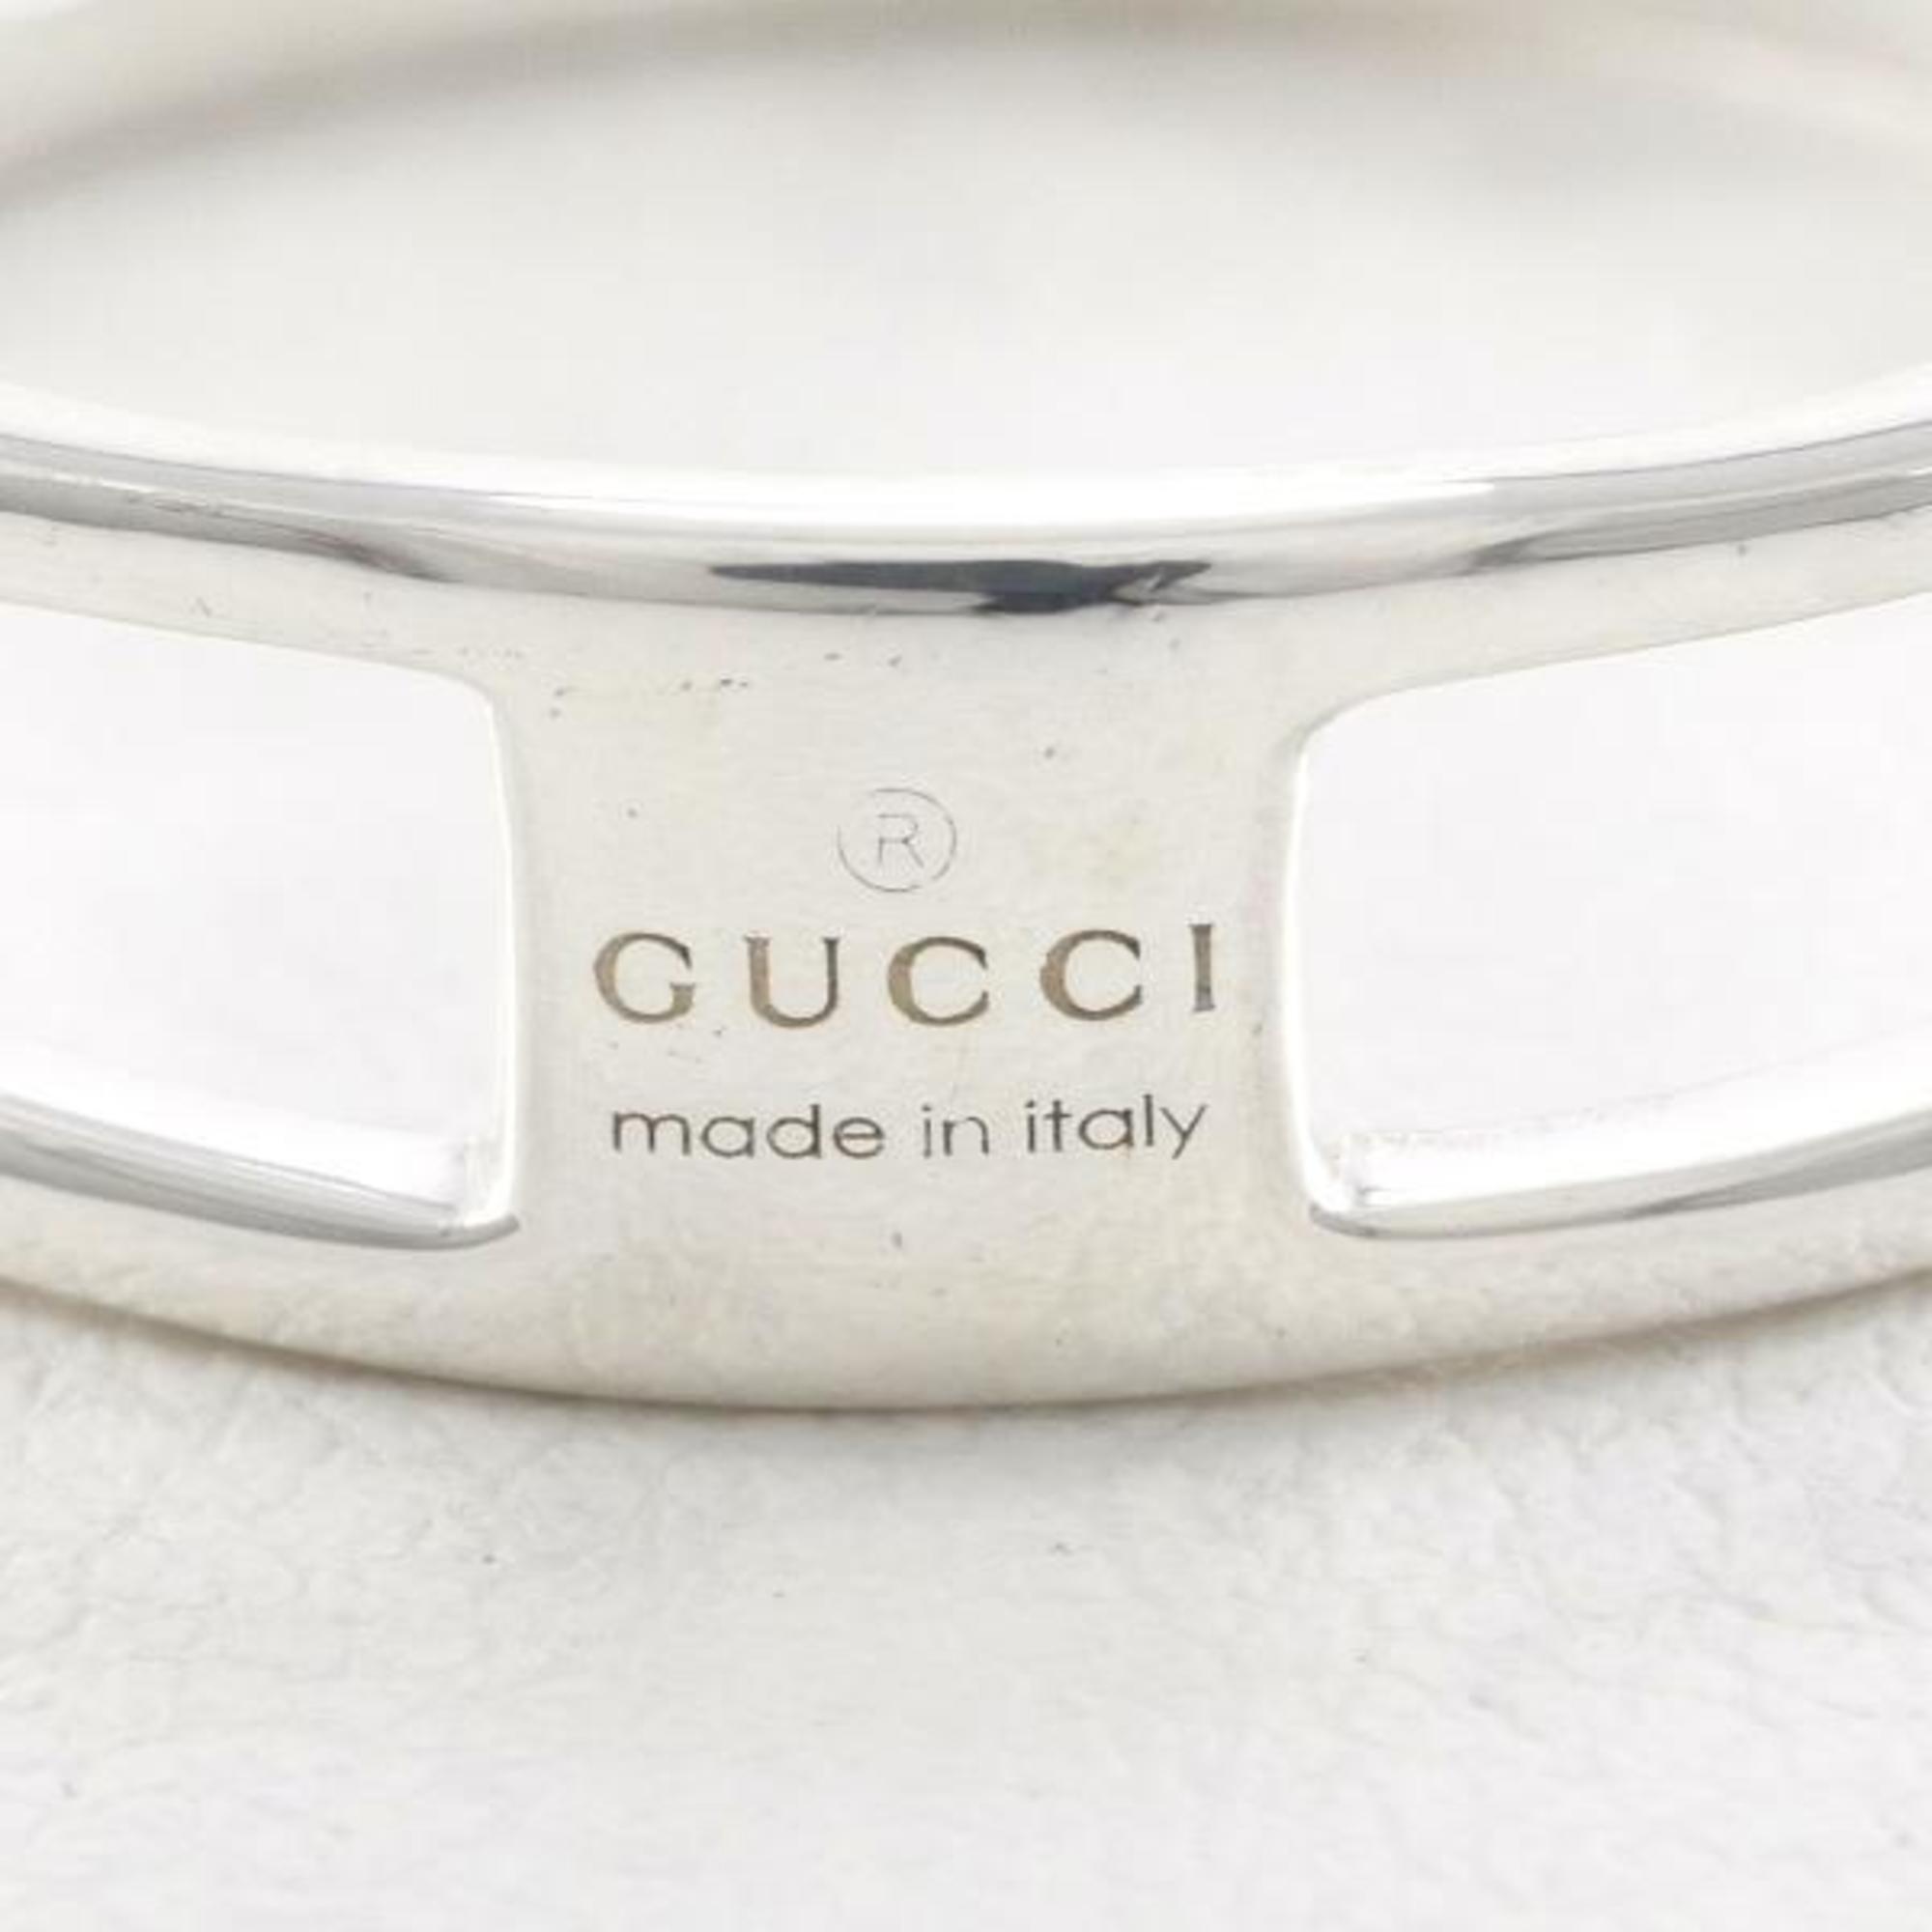 Gucci Interlocking G Silver Ring Box Bag Total Weight Approx. 2.9g Jewelry